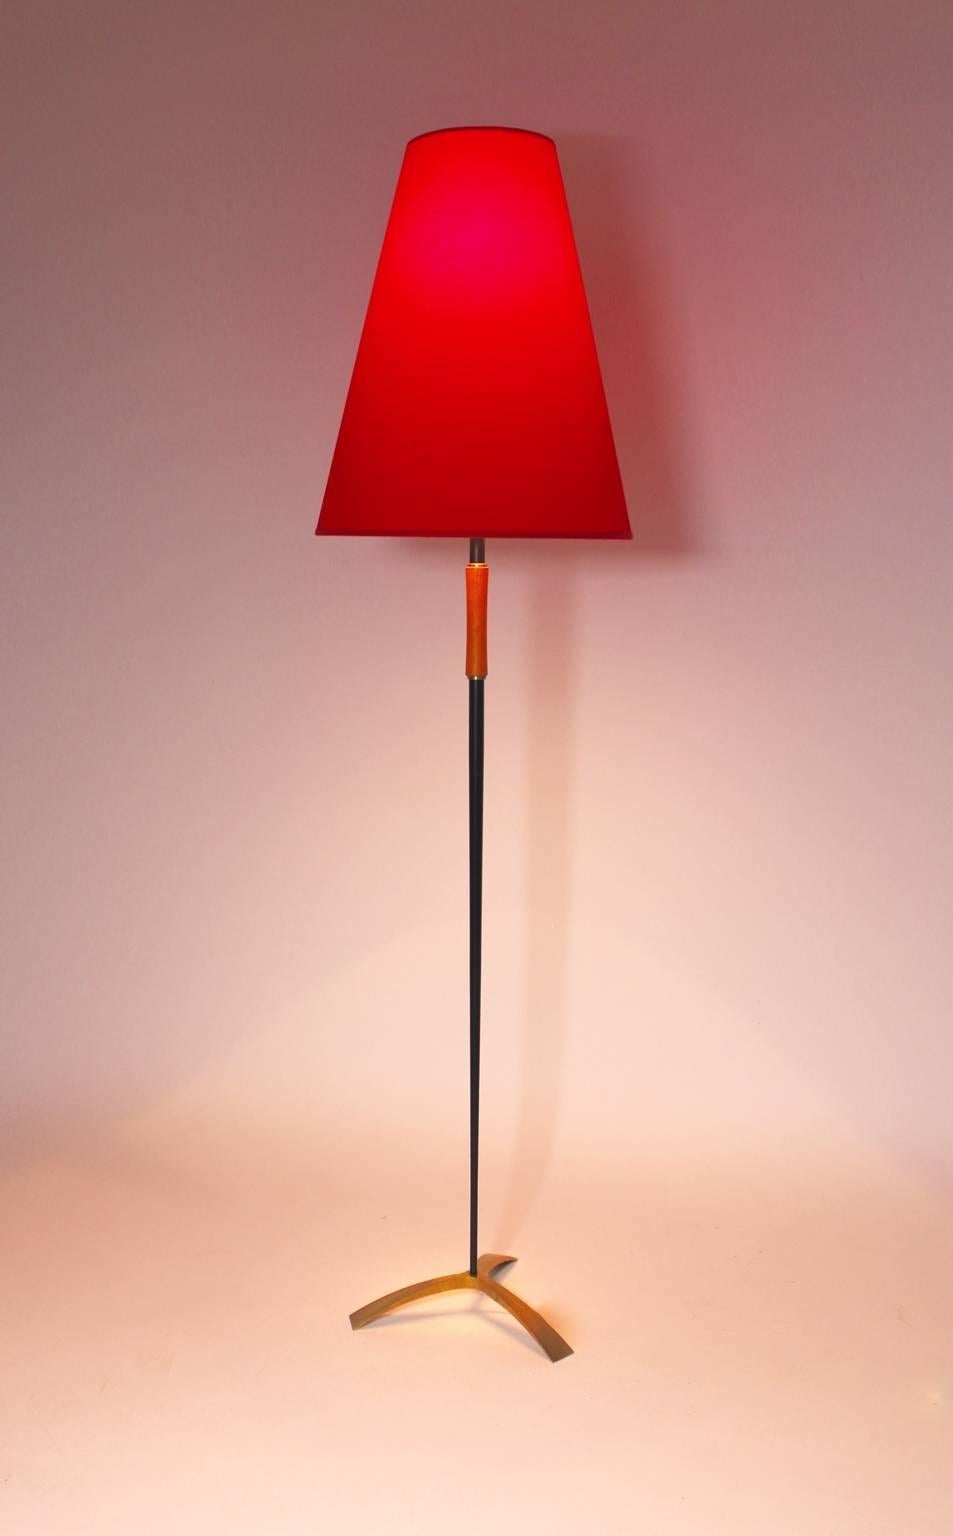 Lacquered  Mid Century Modern Red Black Vintage Tripod Floor Light by J. T. Kalmar 1950s For Sale